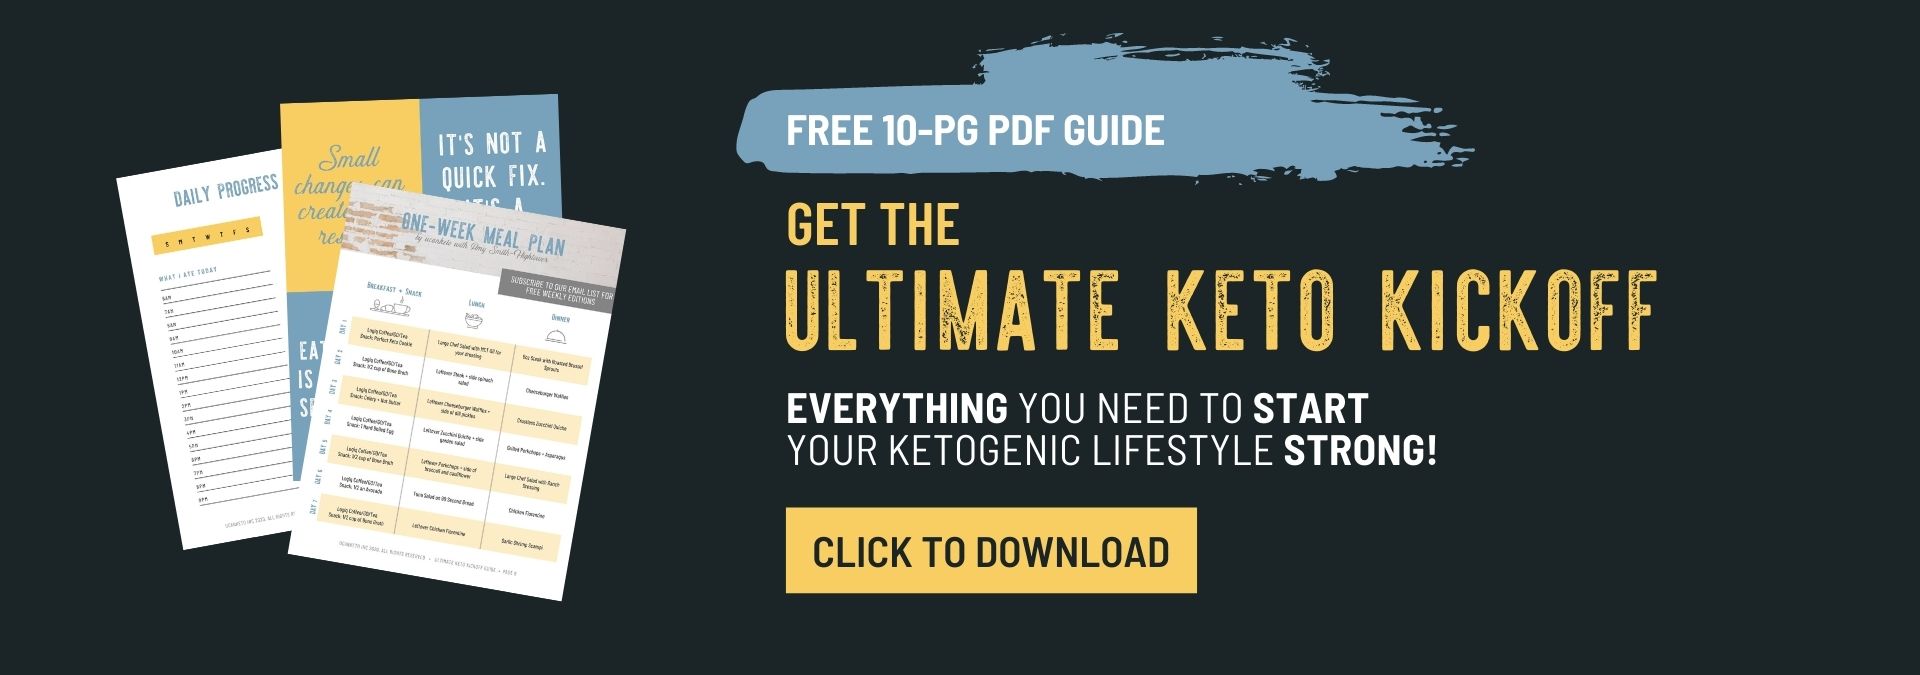 download The Ultimate Keto Kickoff Guide